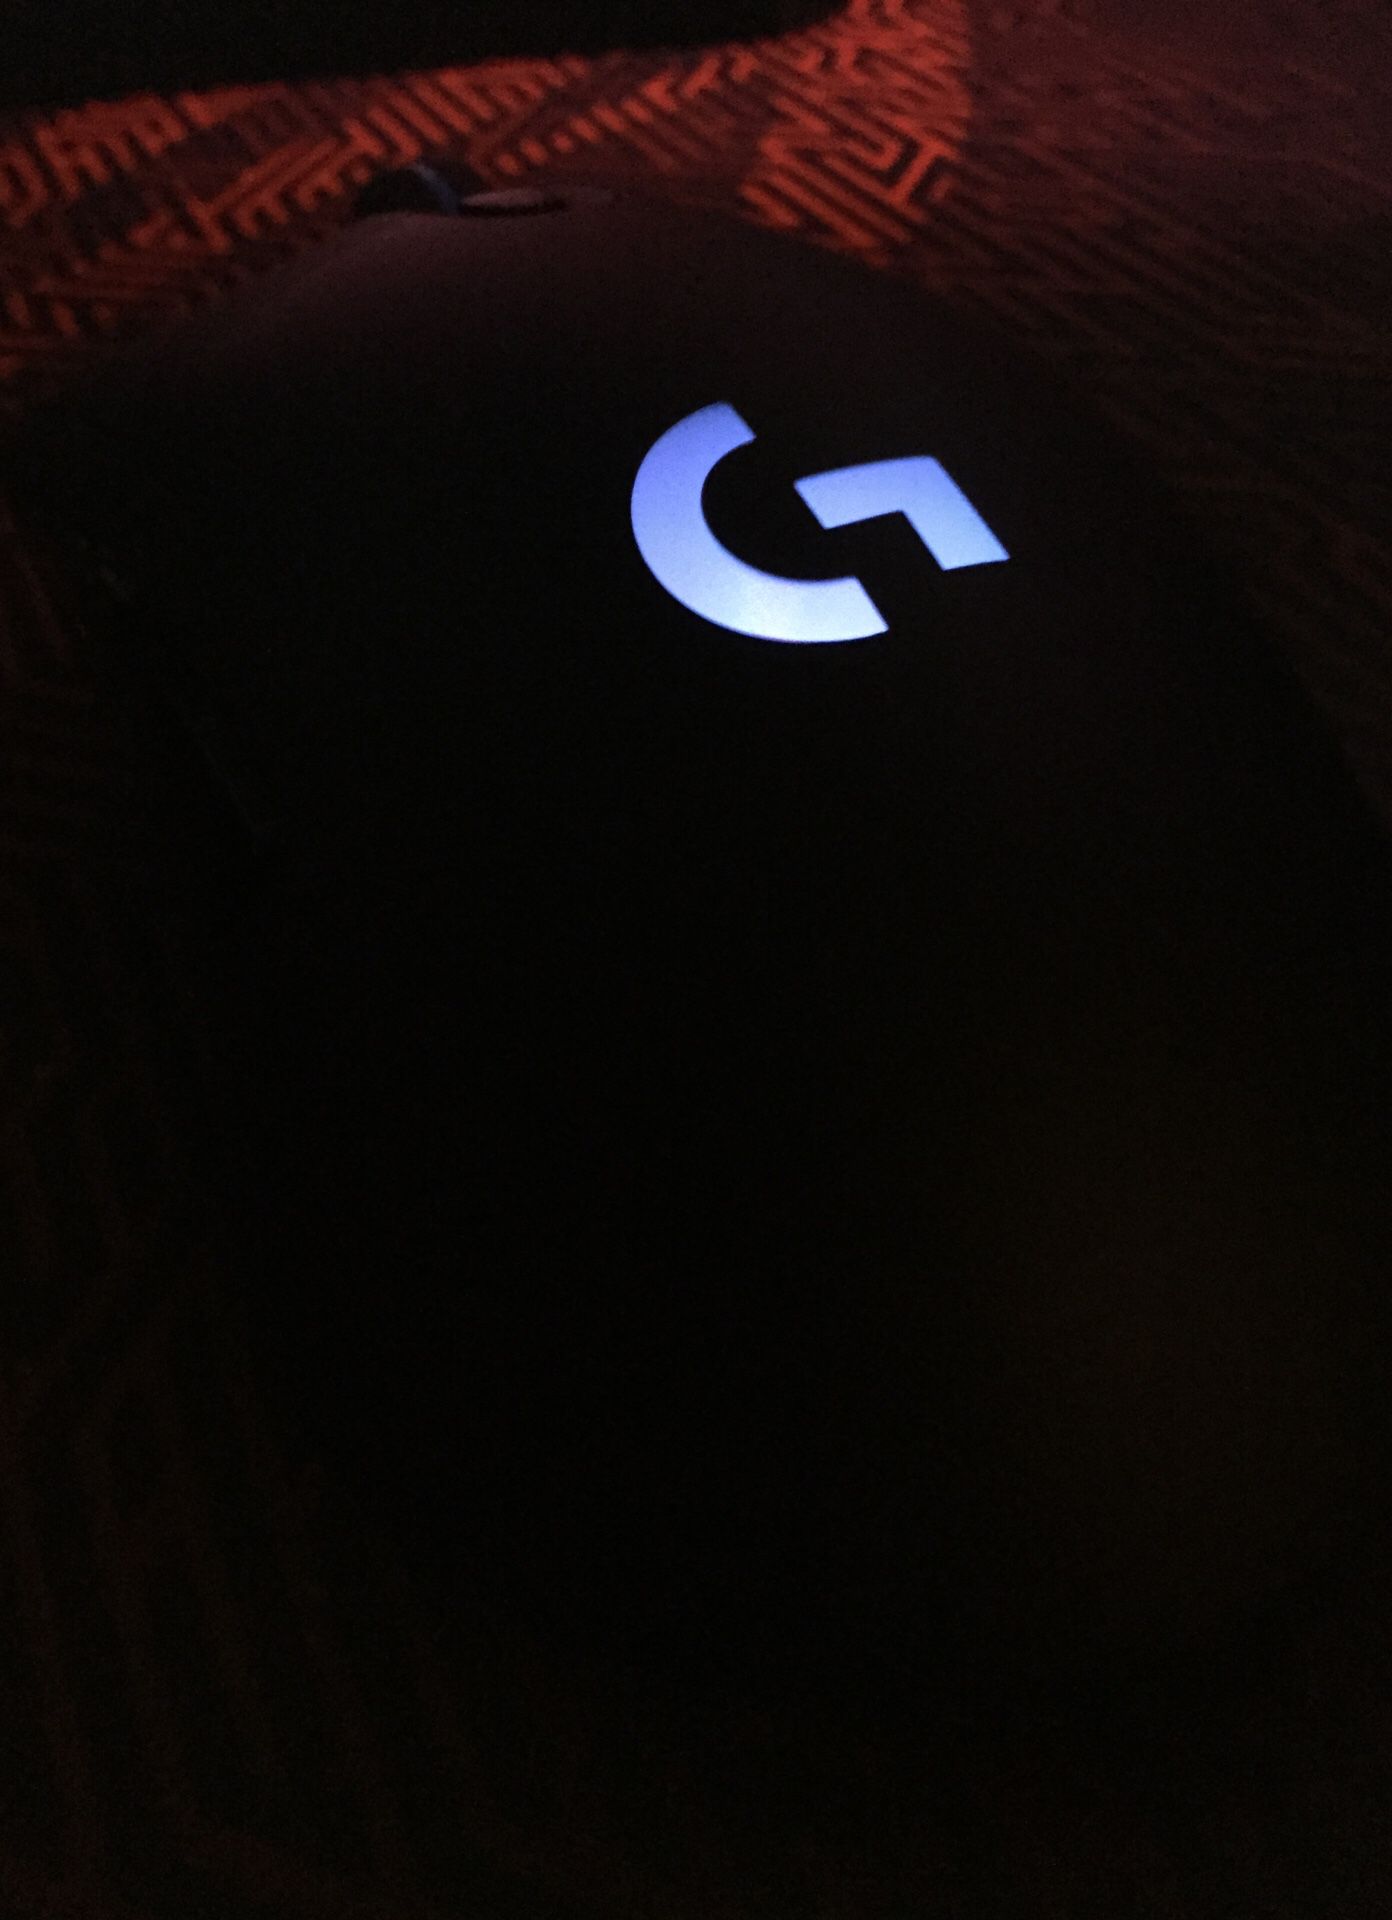 Logitech g703 wireless gaming mouse